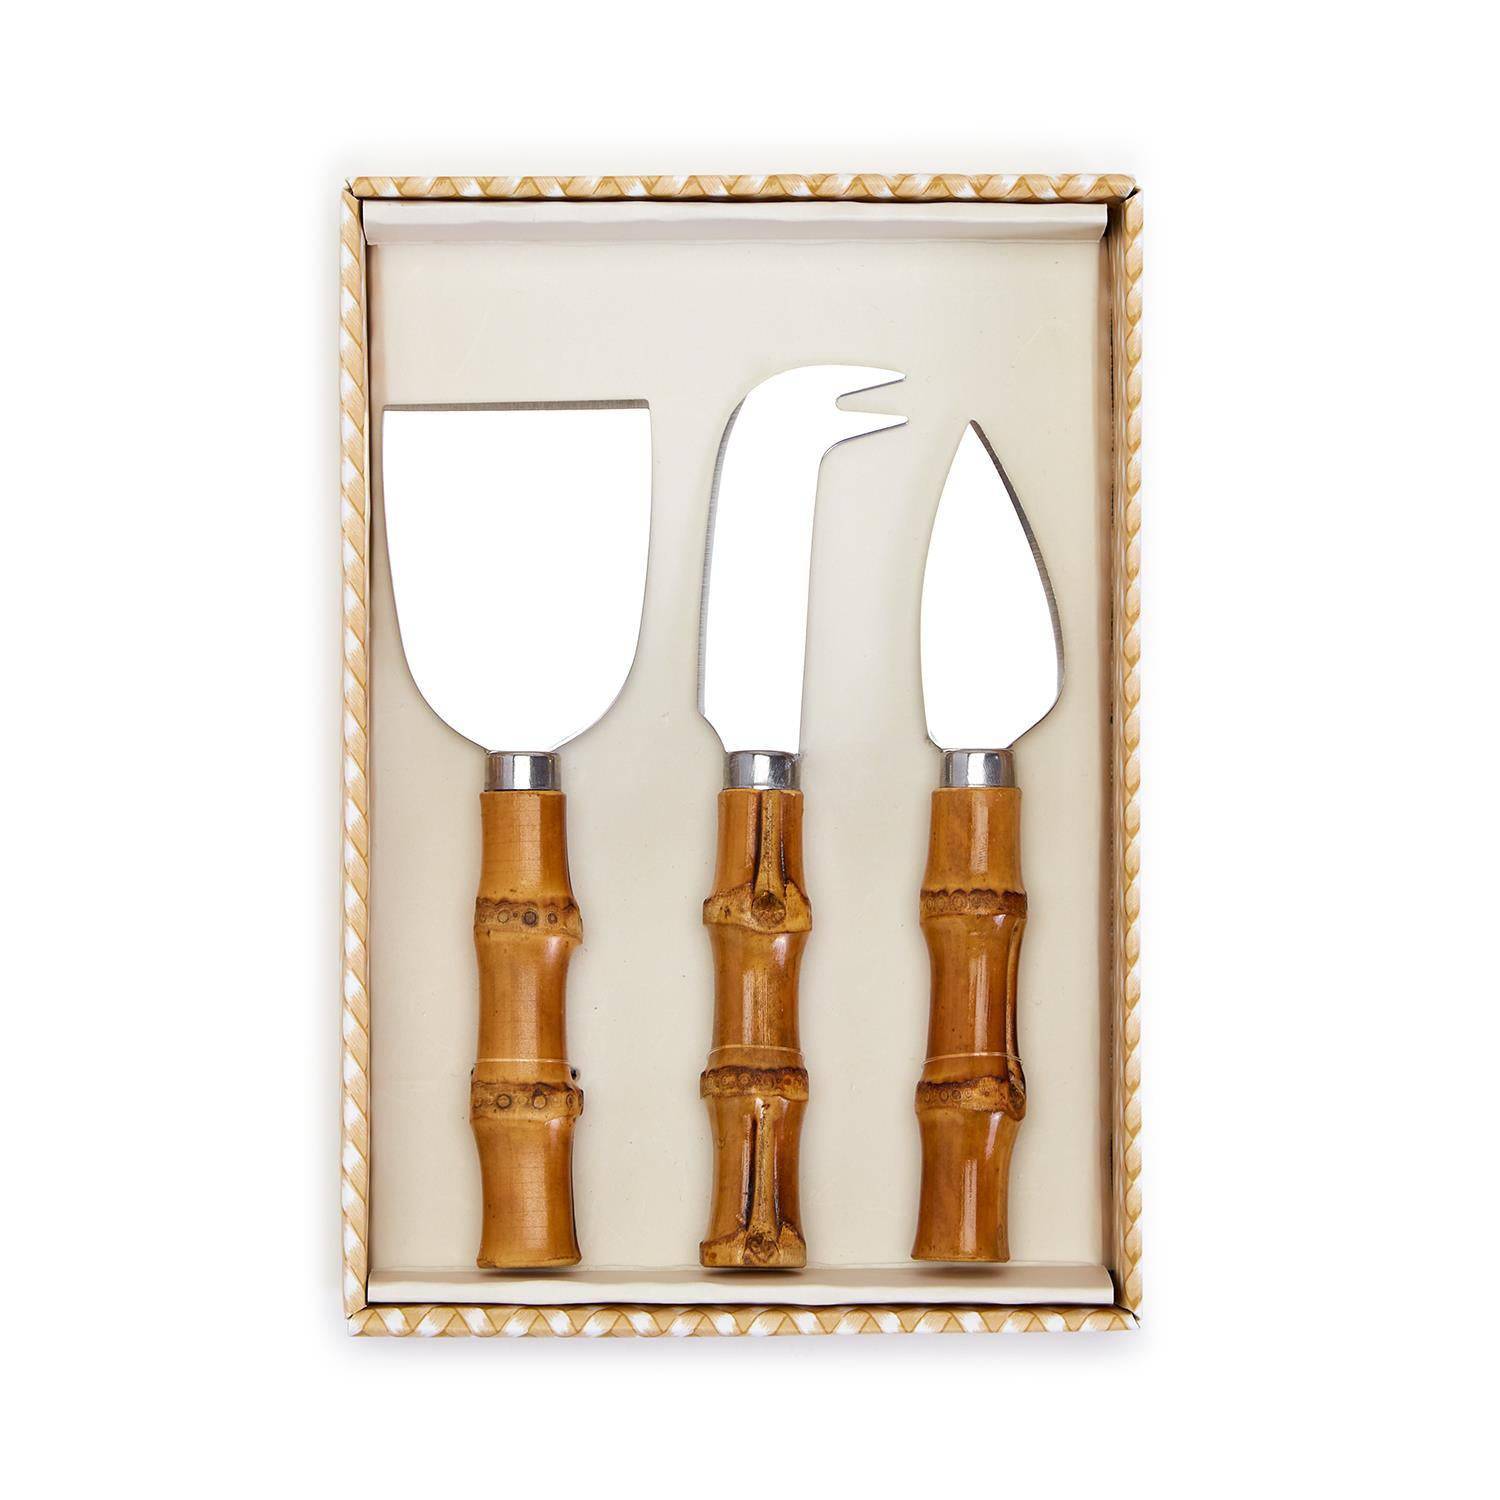 Natural Bamboo Handle Set of 3 Cheese Knives in Gift Box - The Preppy Bunny